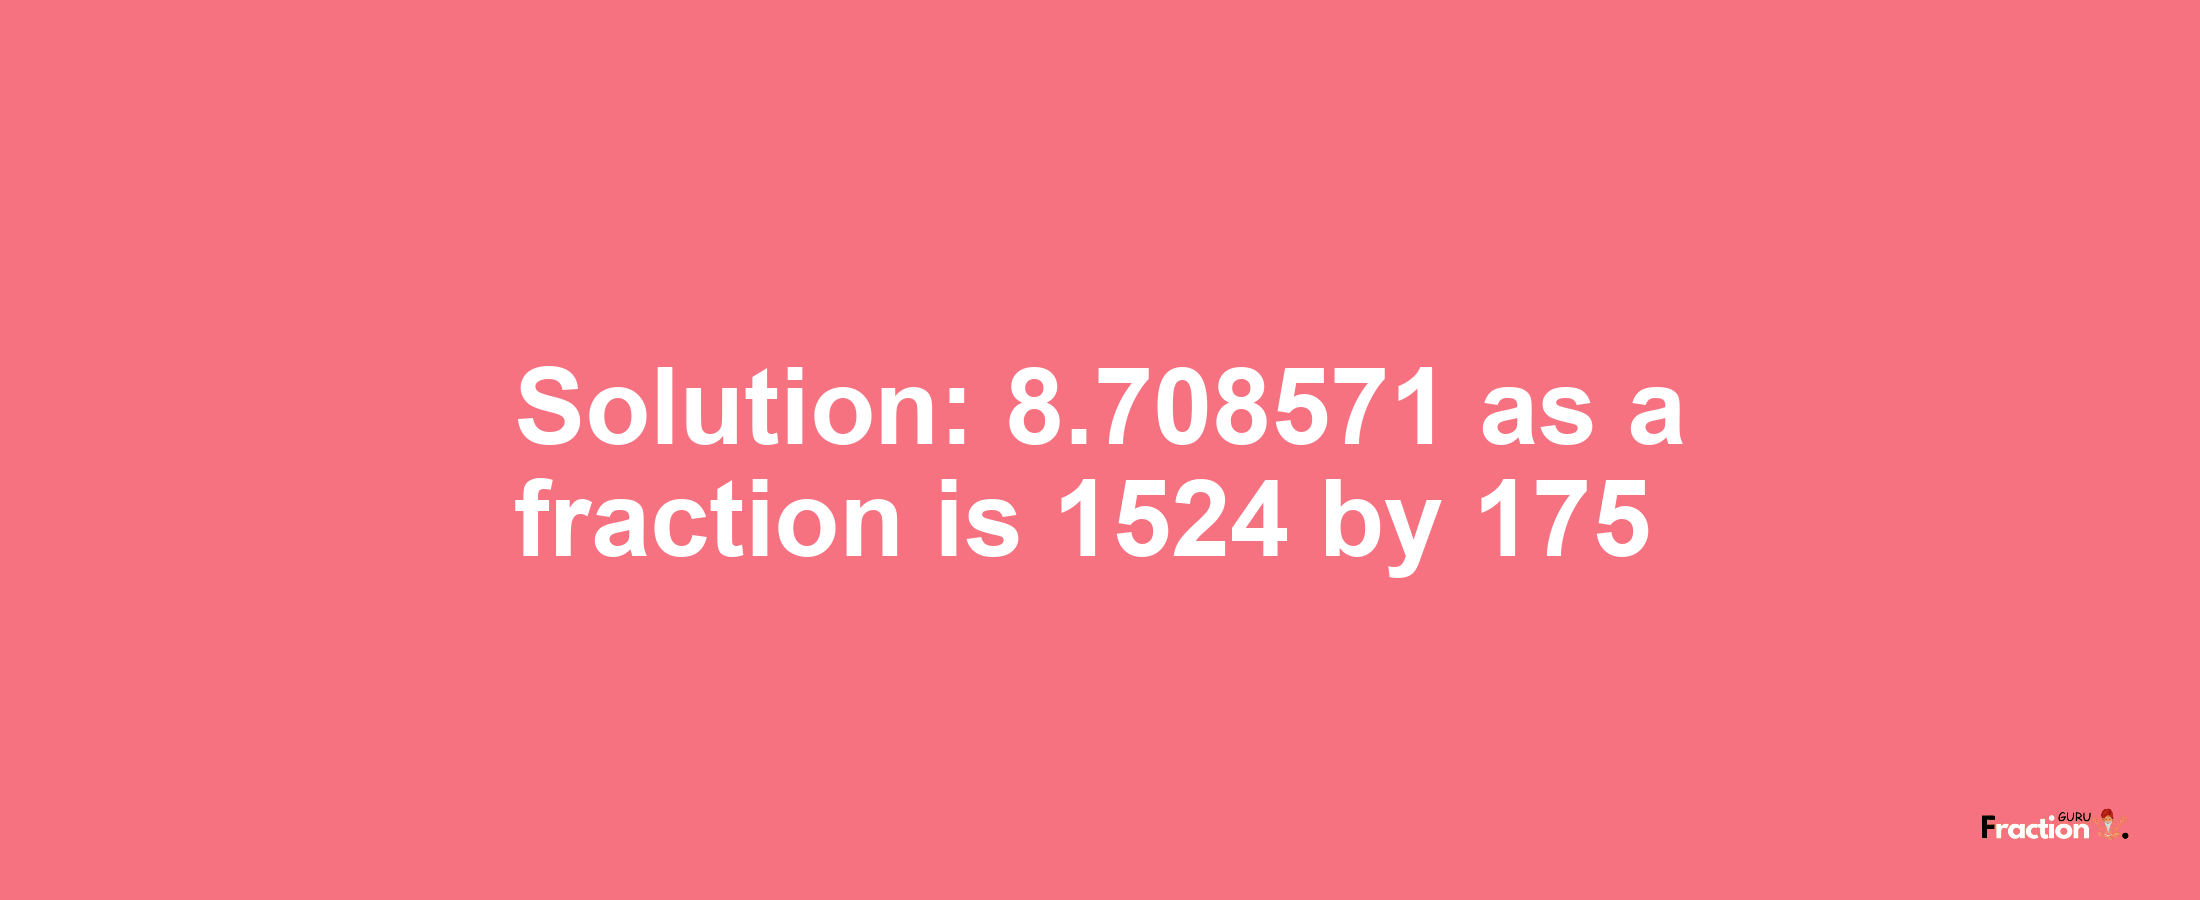 Solution:8.708571 as a fraction is 1524/175